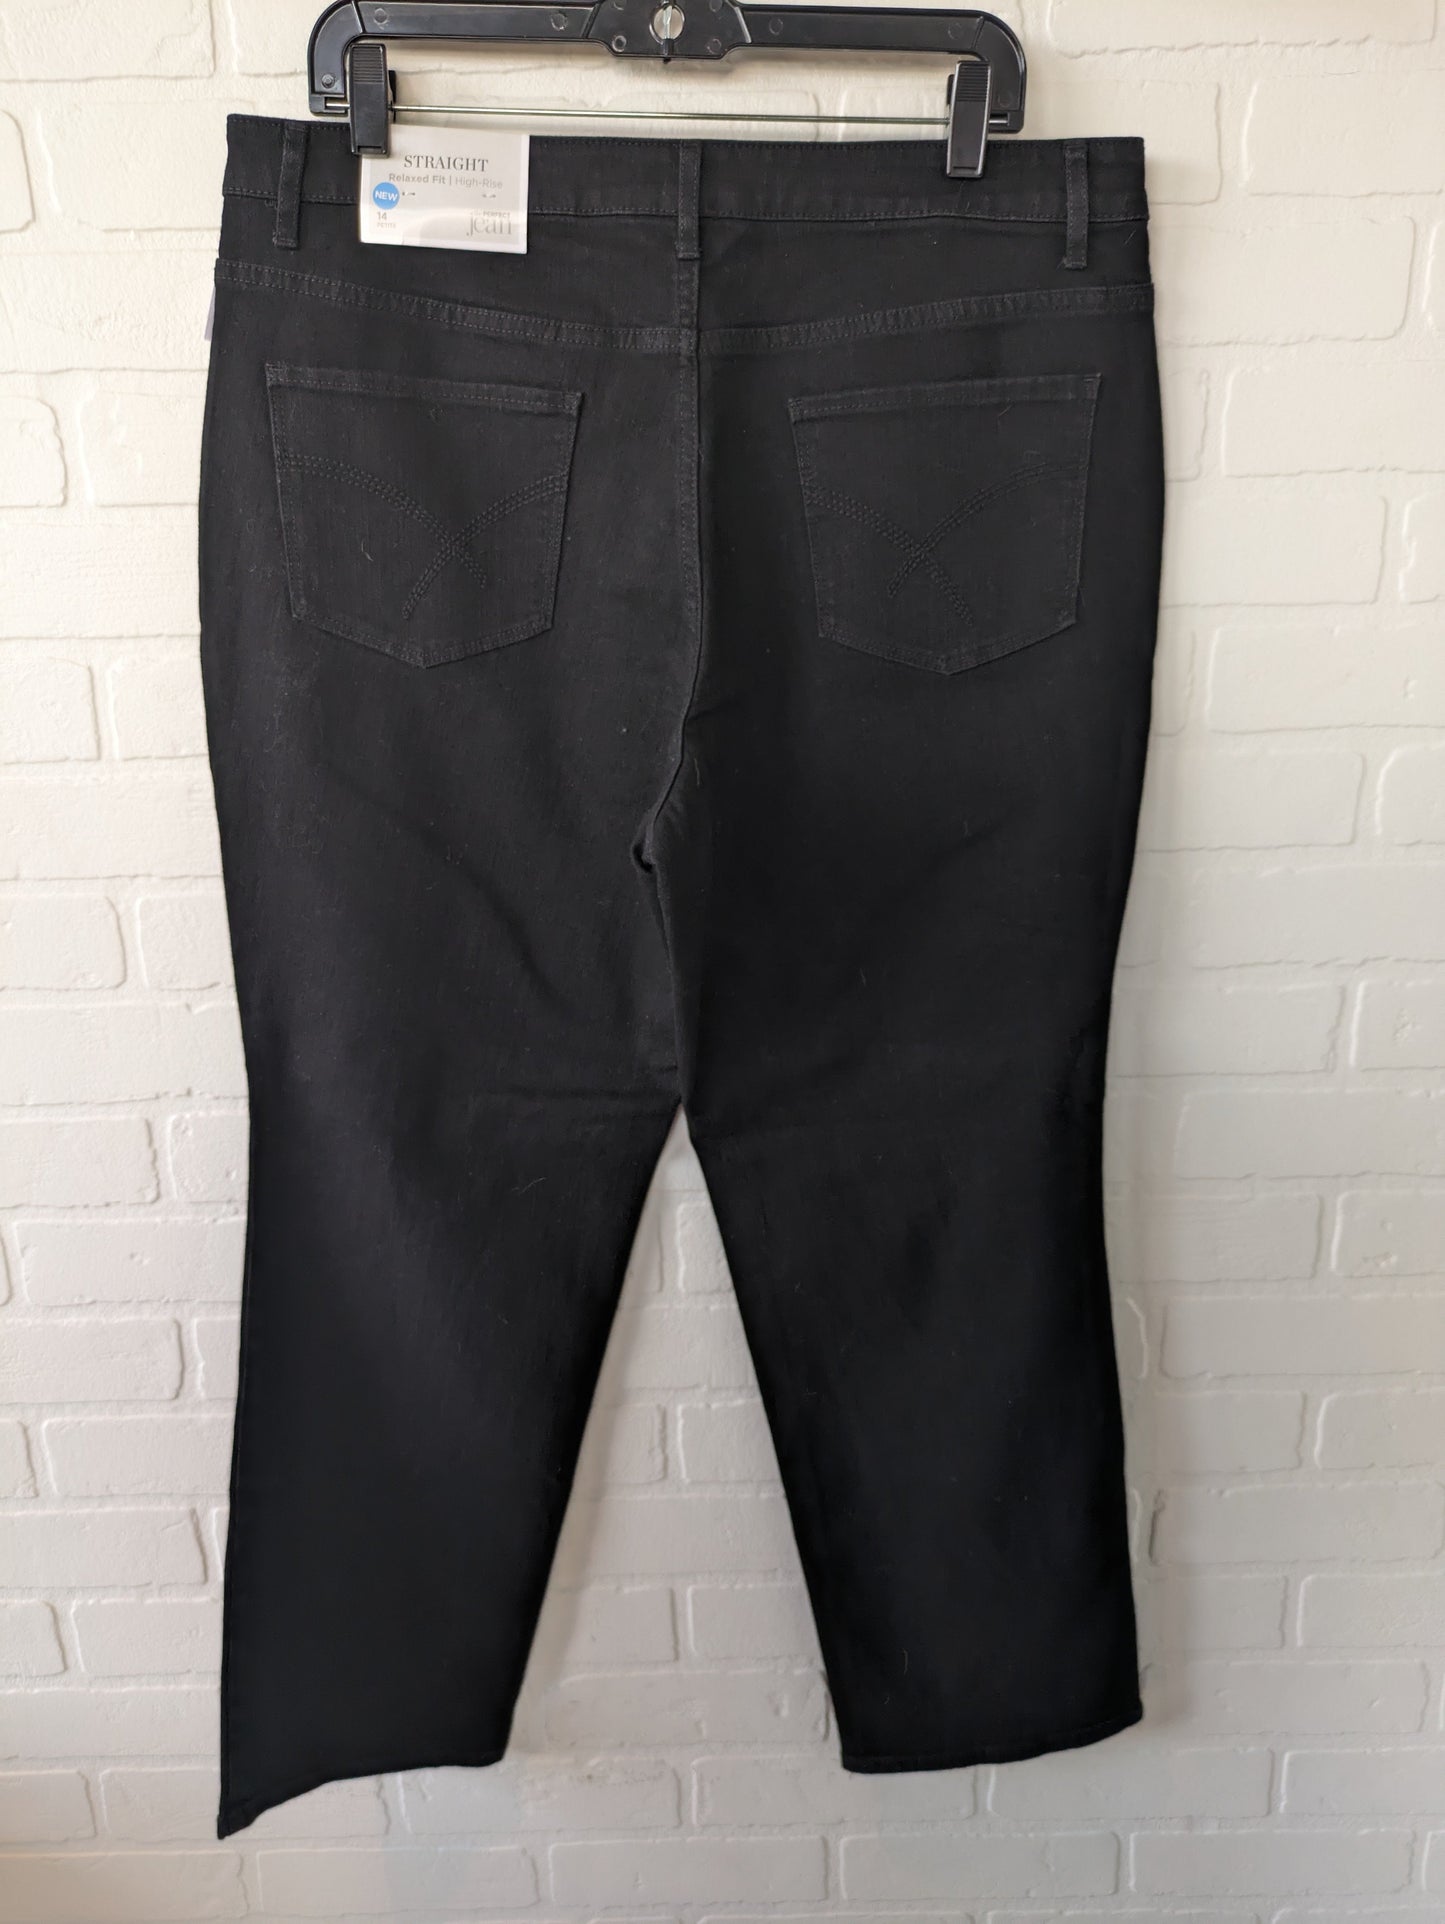 Jeans Straight By Christopher And Banks  Size: 14petite